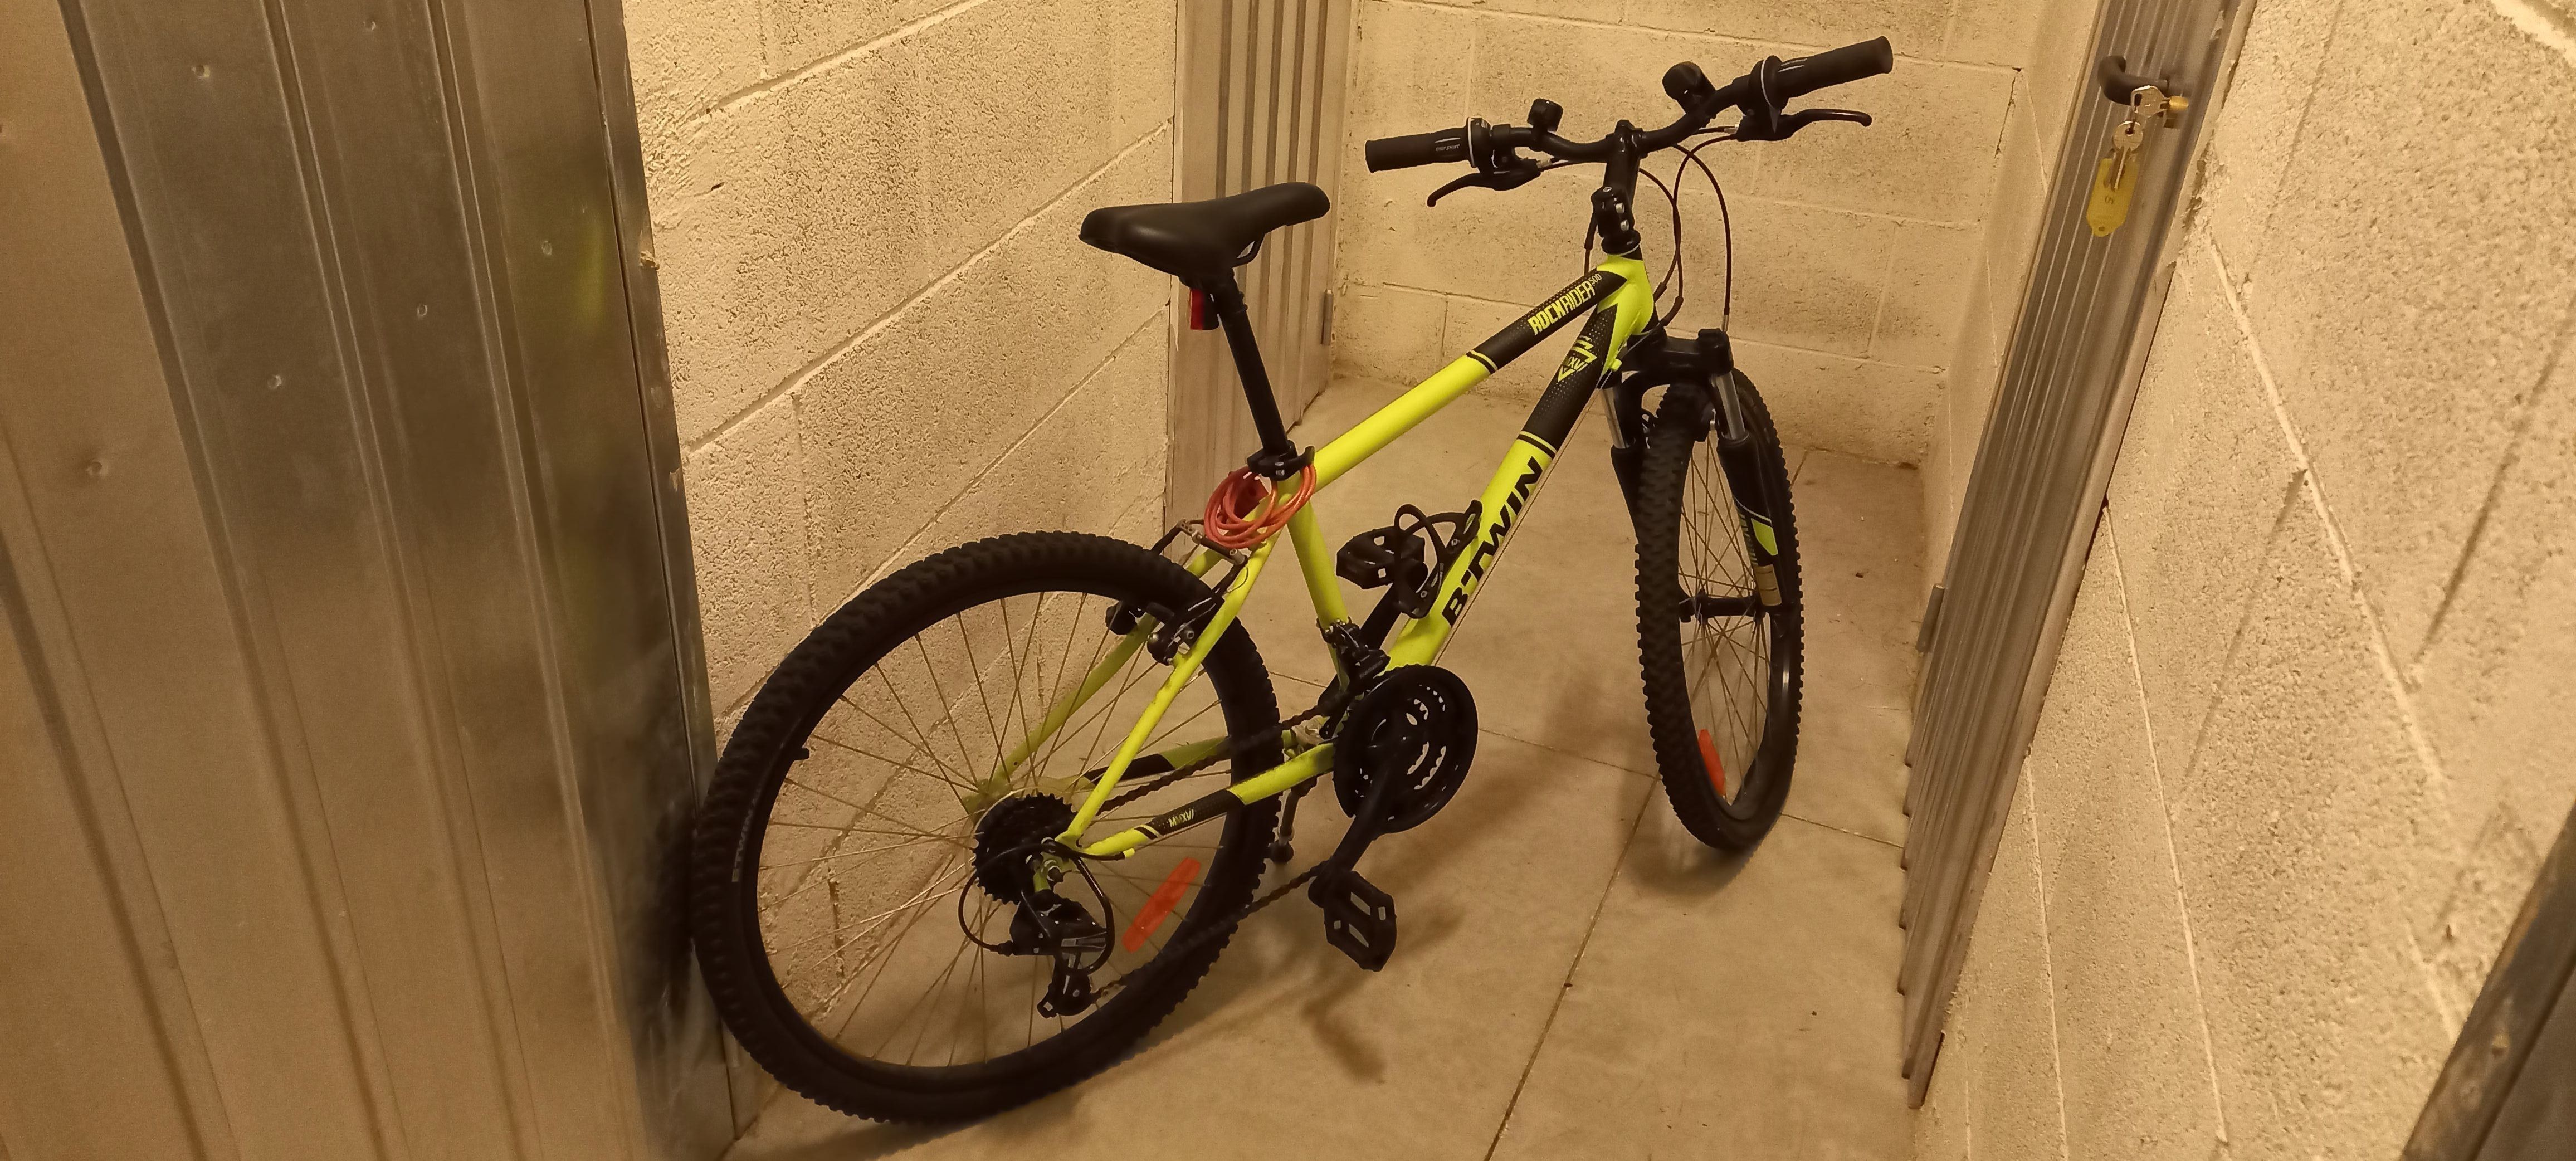 B’TWIN rockrider 500 used in 43 cm | buycycle